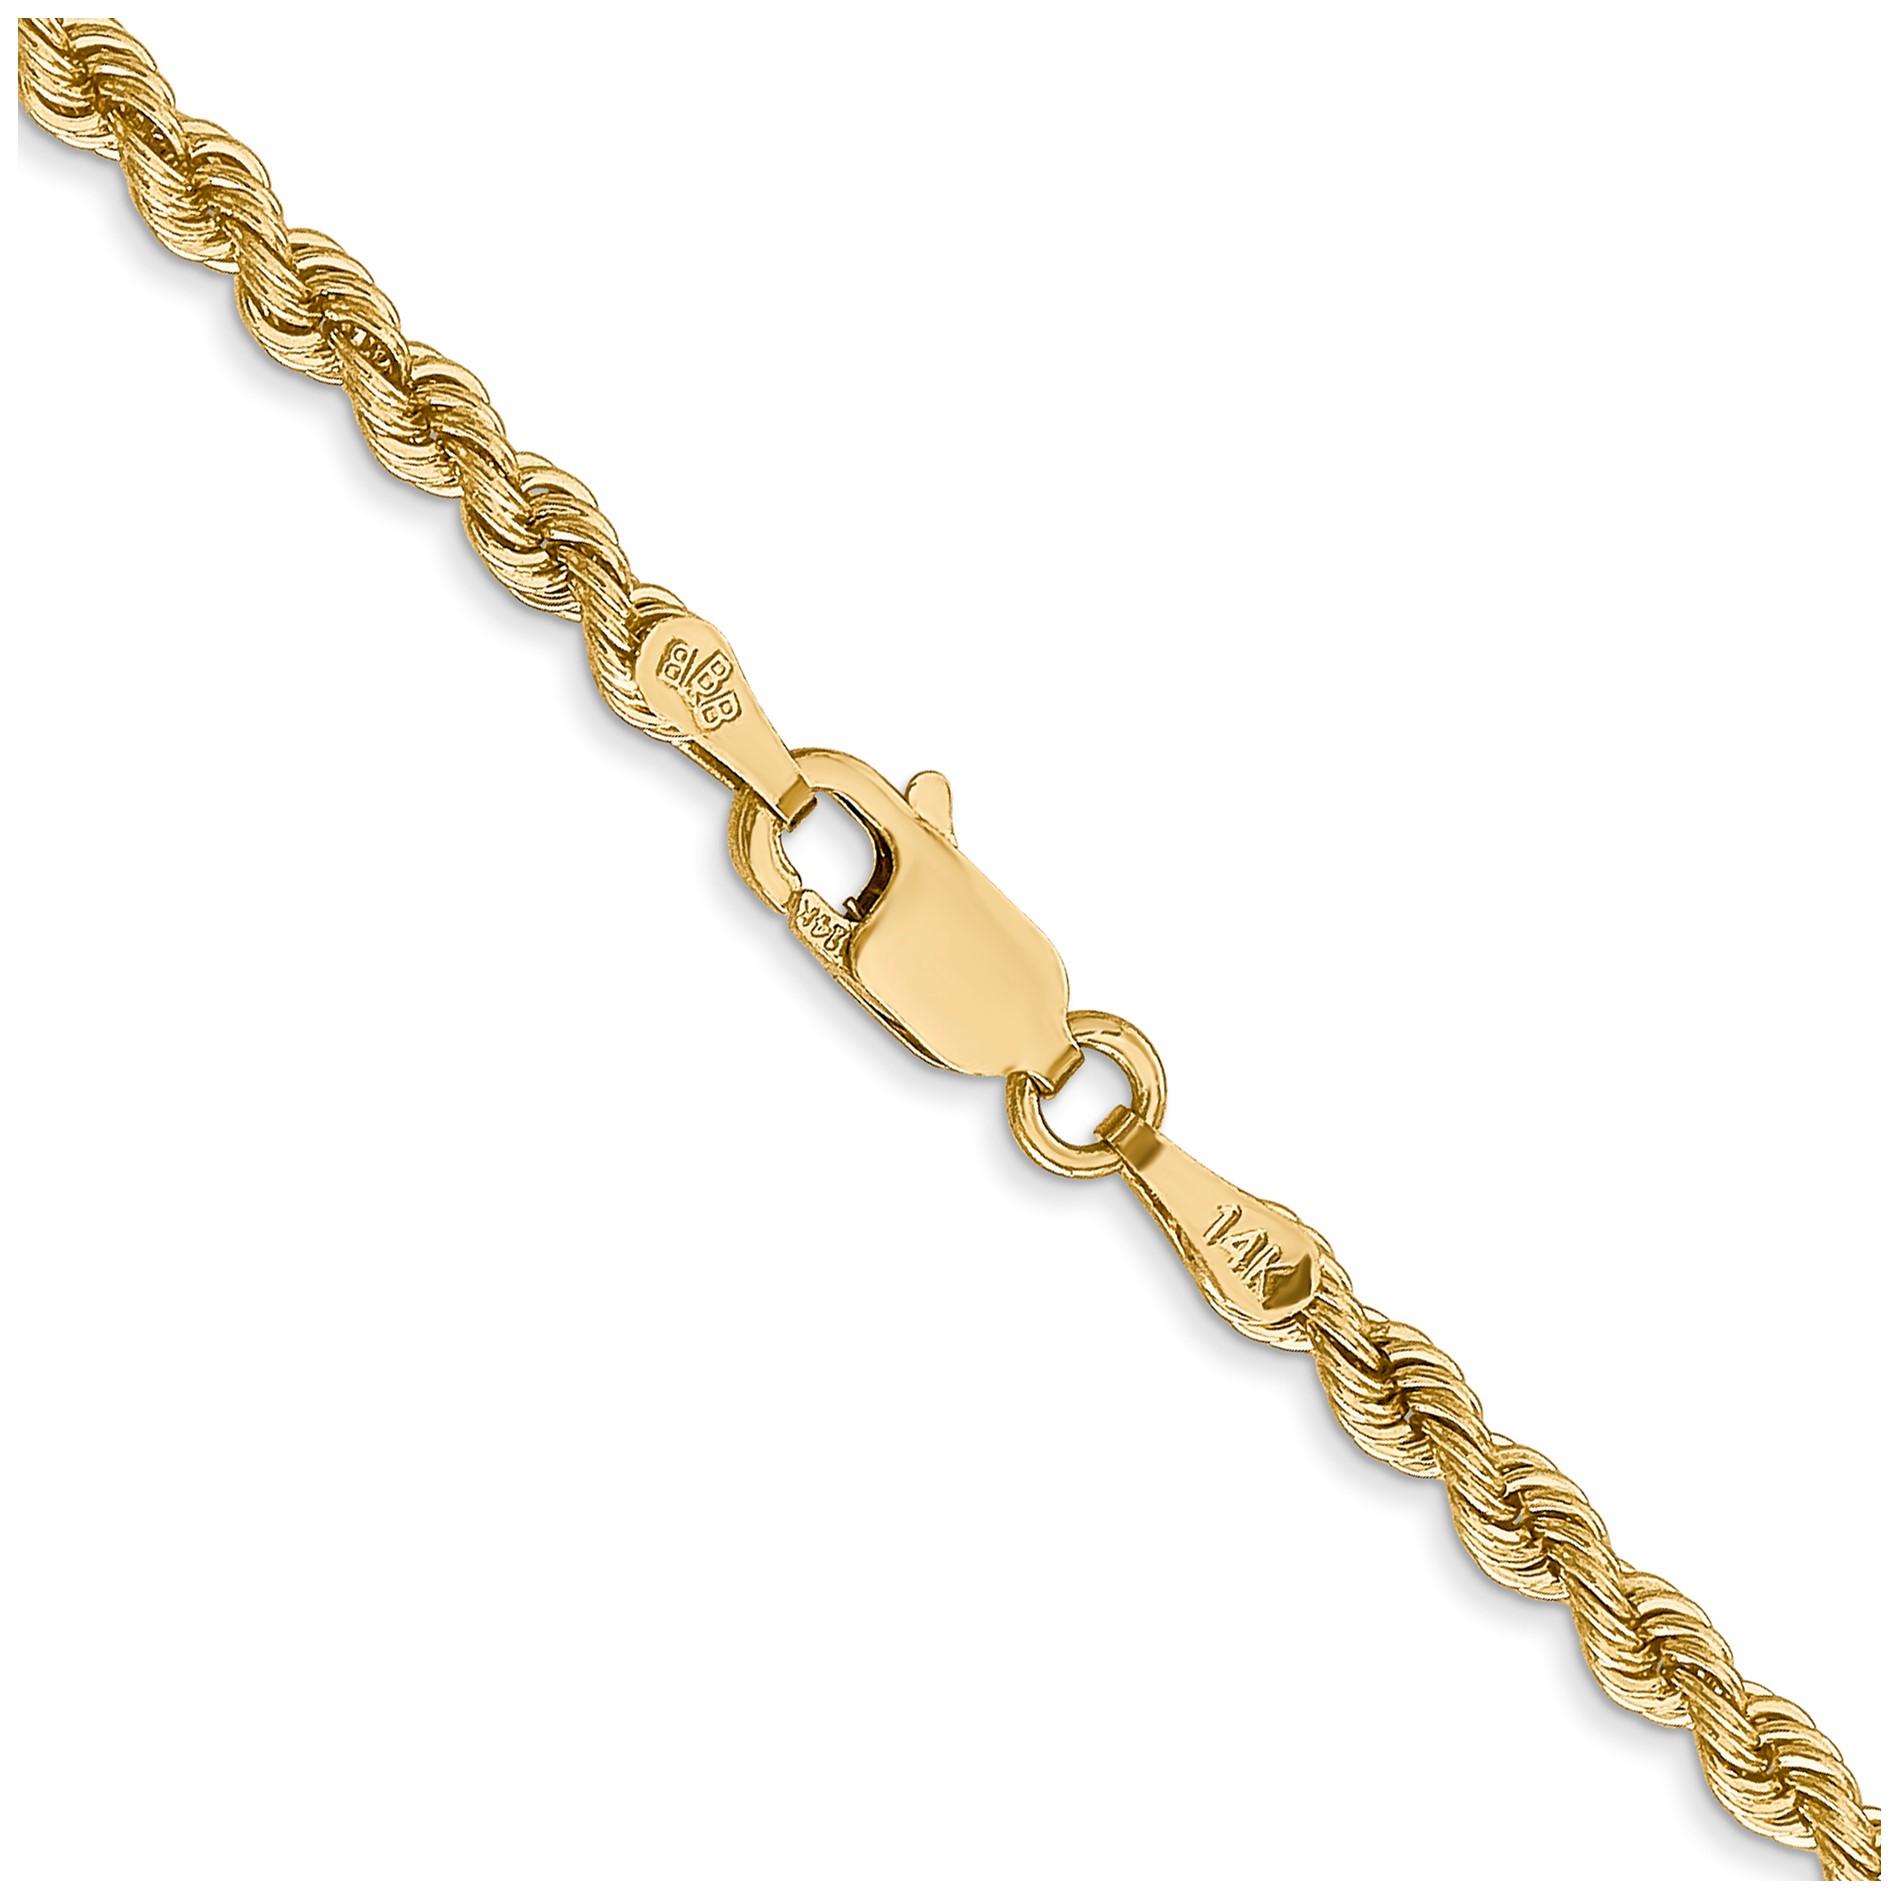 Diamond2Deal 14K Yellow Gold 2.75mm Handmade Rope Chain Necklace for Women